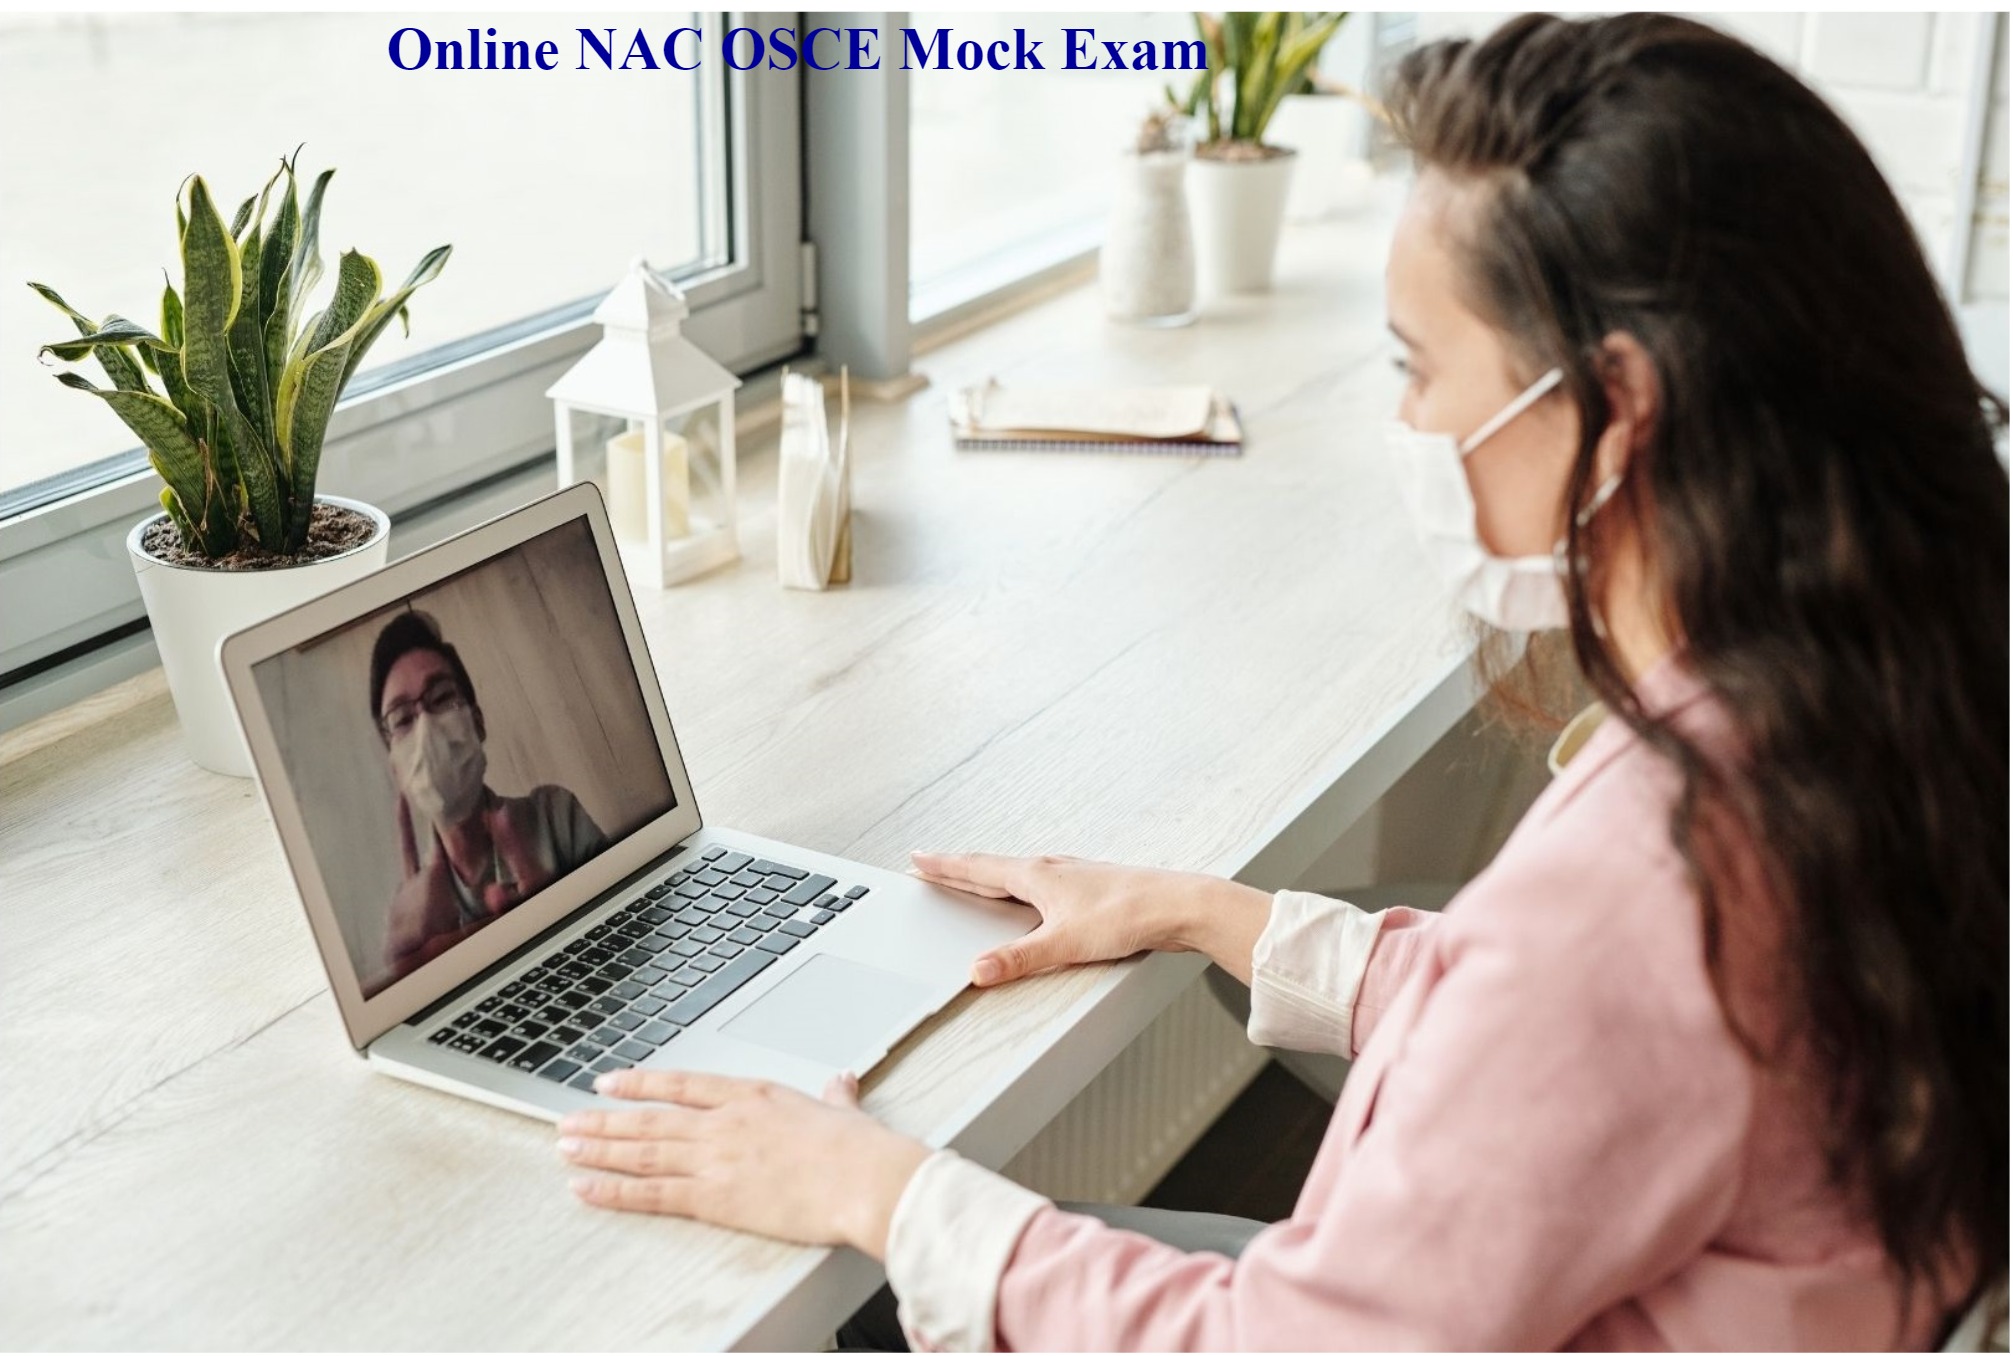 Online NAC OSCE Mock Exam (one student at a time)(subscribers eligible for a 20-40% discount)